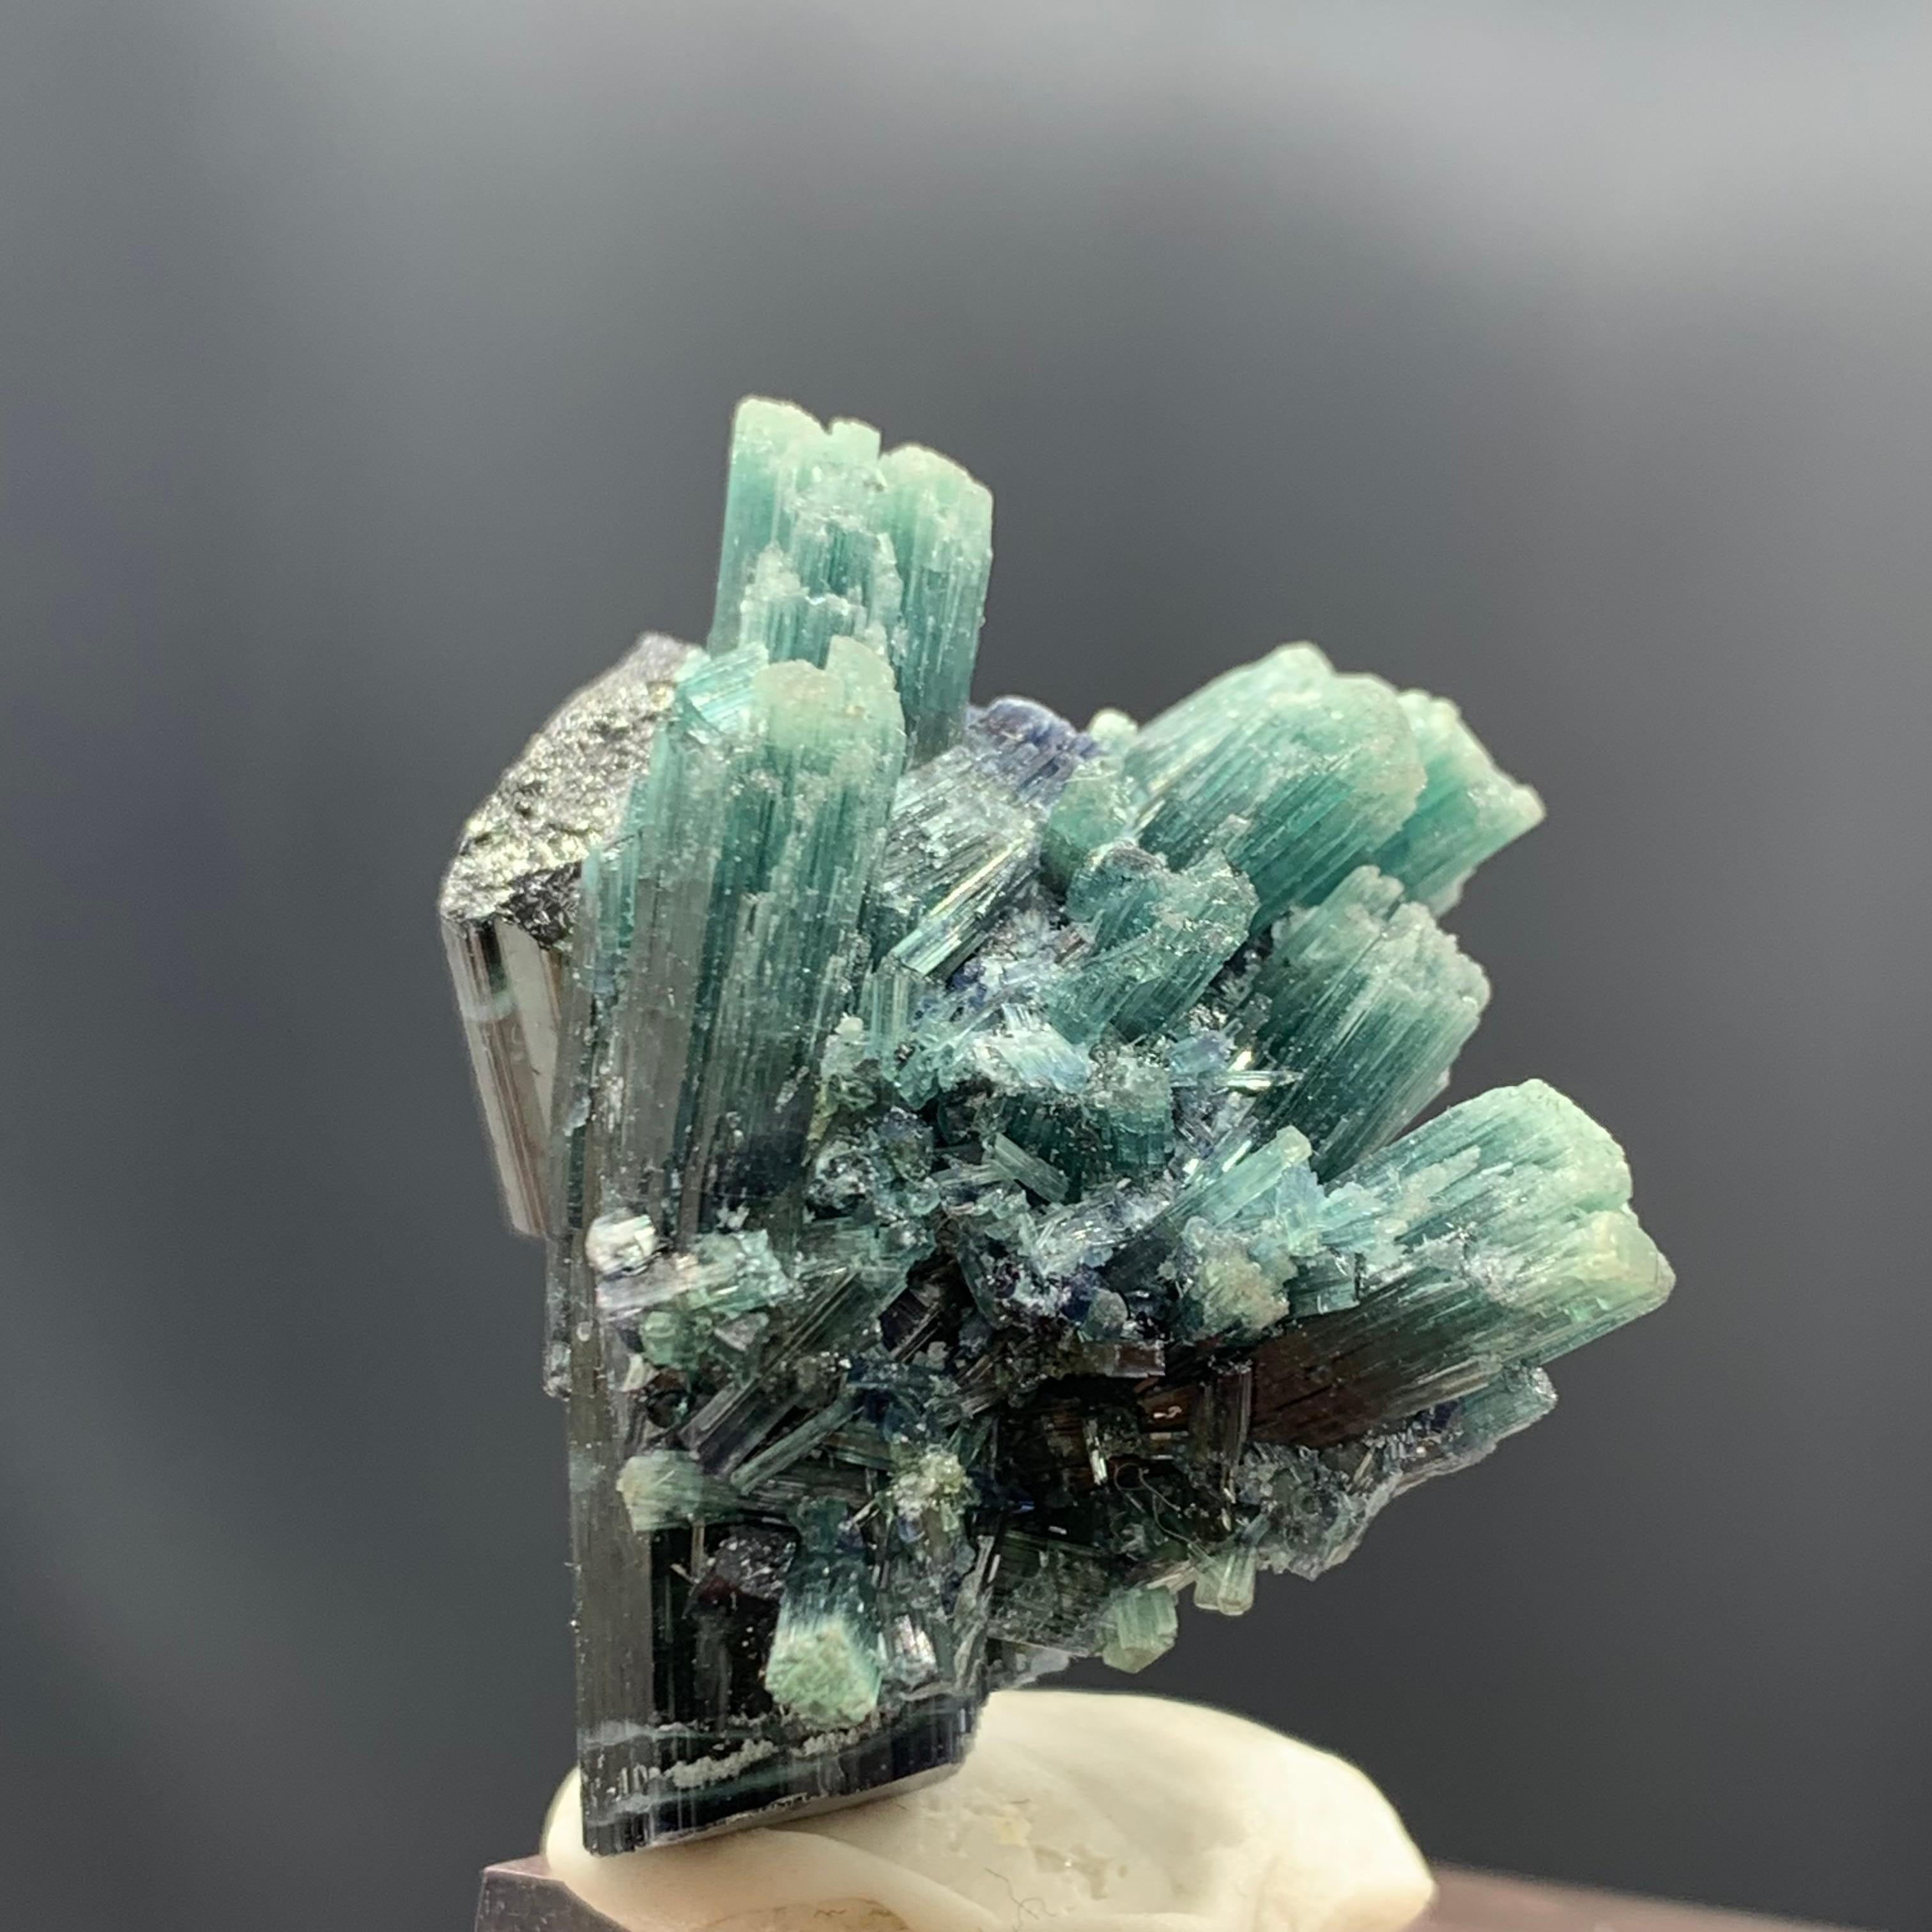 12.70 Gram Gorgeous Tourmaline Crystal Cluster From Kunar, Afghanistan 

Weight: 12.70 Gram 
Dimension: 3.2 x 2.9 x 1.8 Cm
Origin: kunar, Afghanistan 

Tourmaline is a crystalline silicate mineral group in which boron is compounded with elements